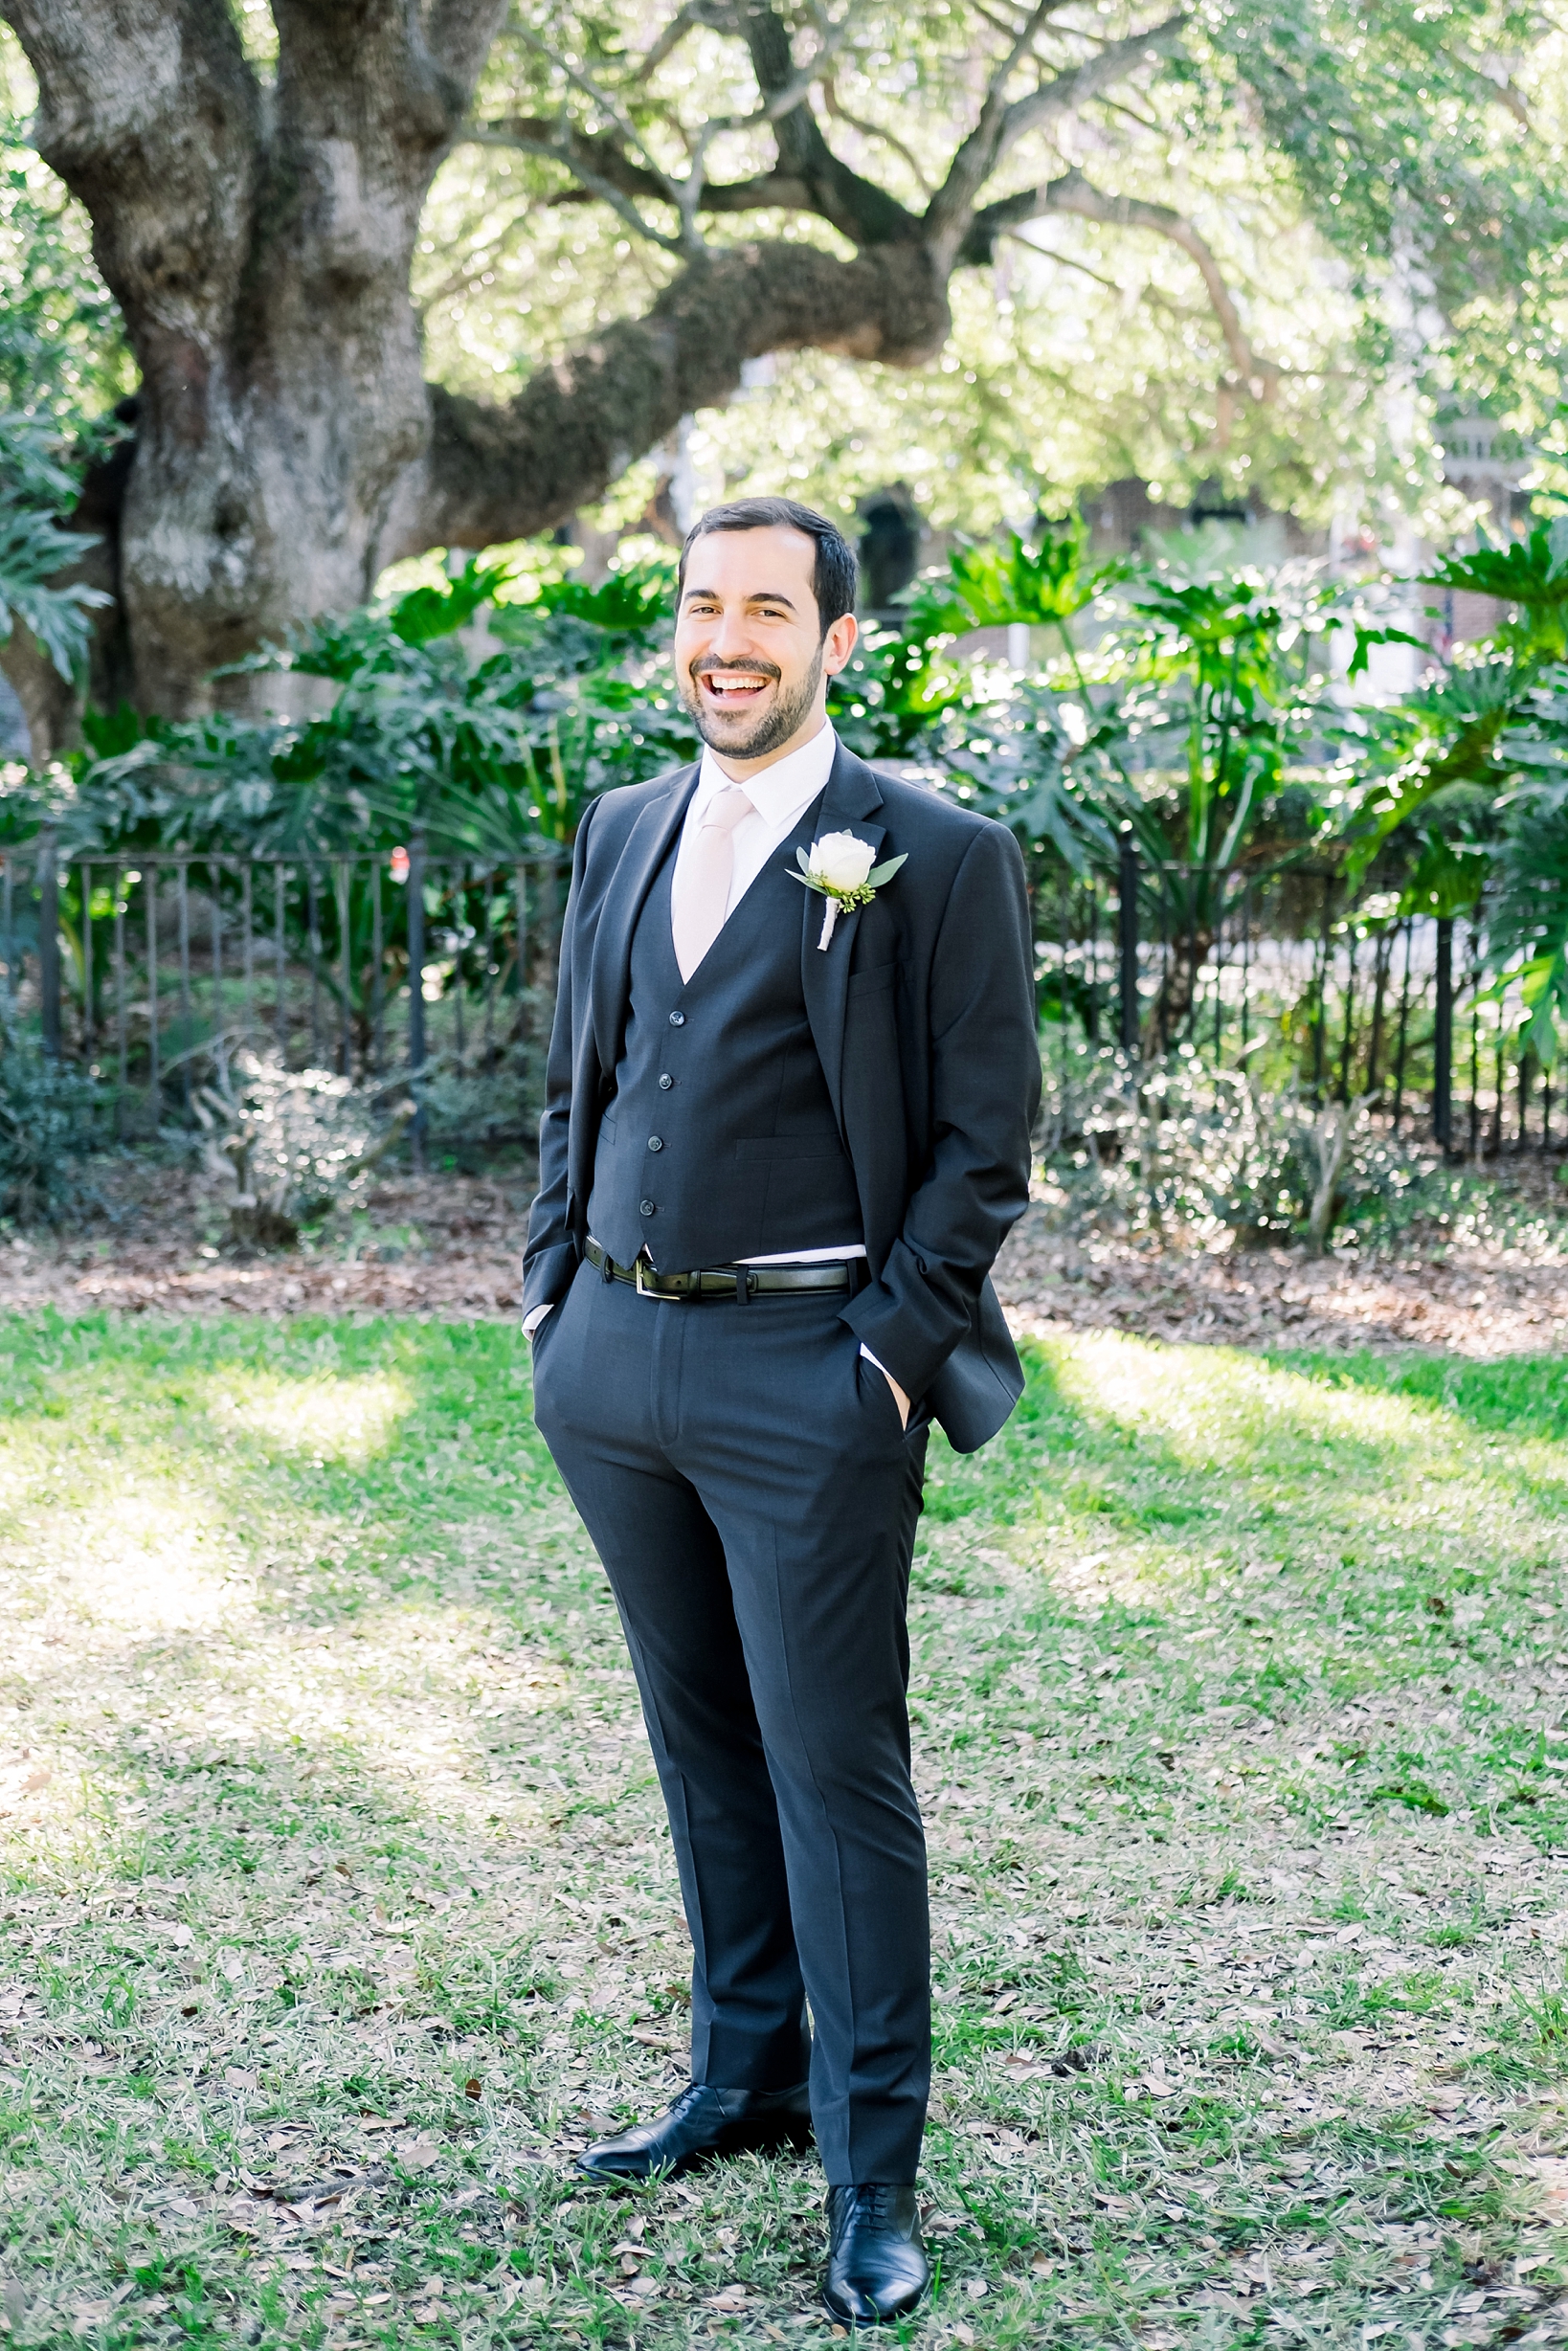 Solo portrait of the Groom under the trees of downtown Tampa, FL